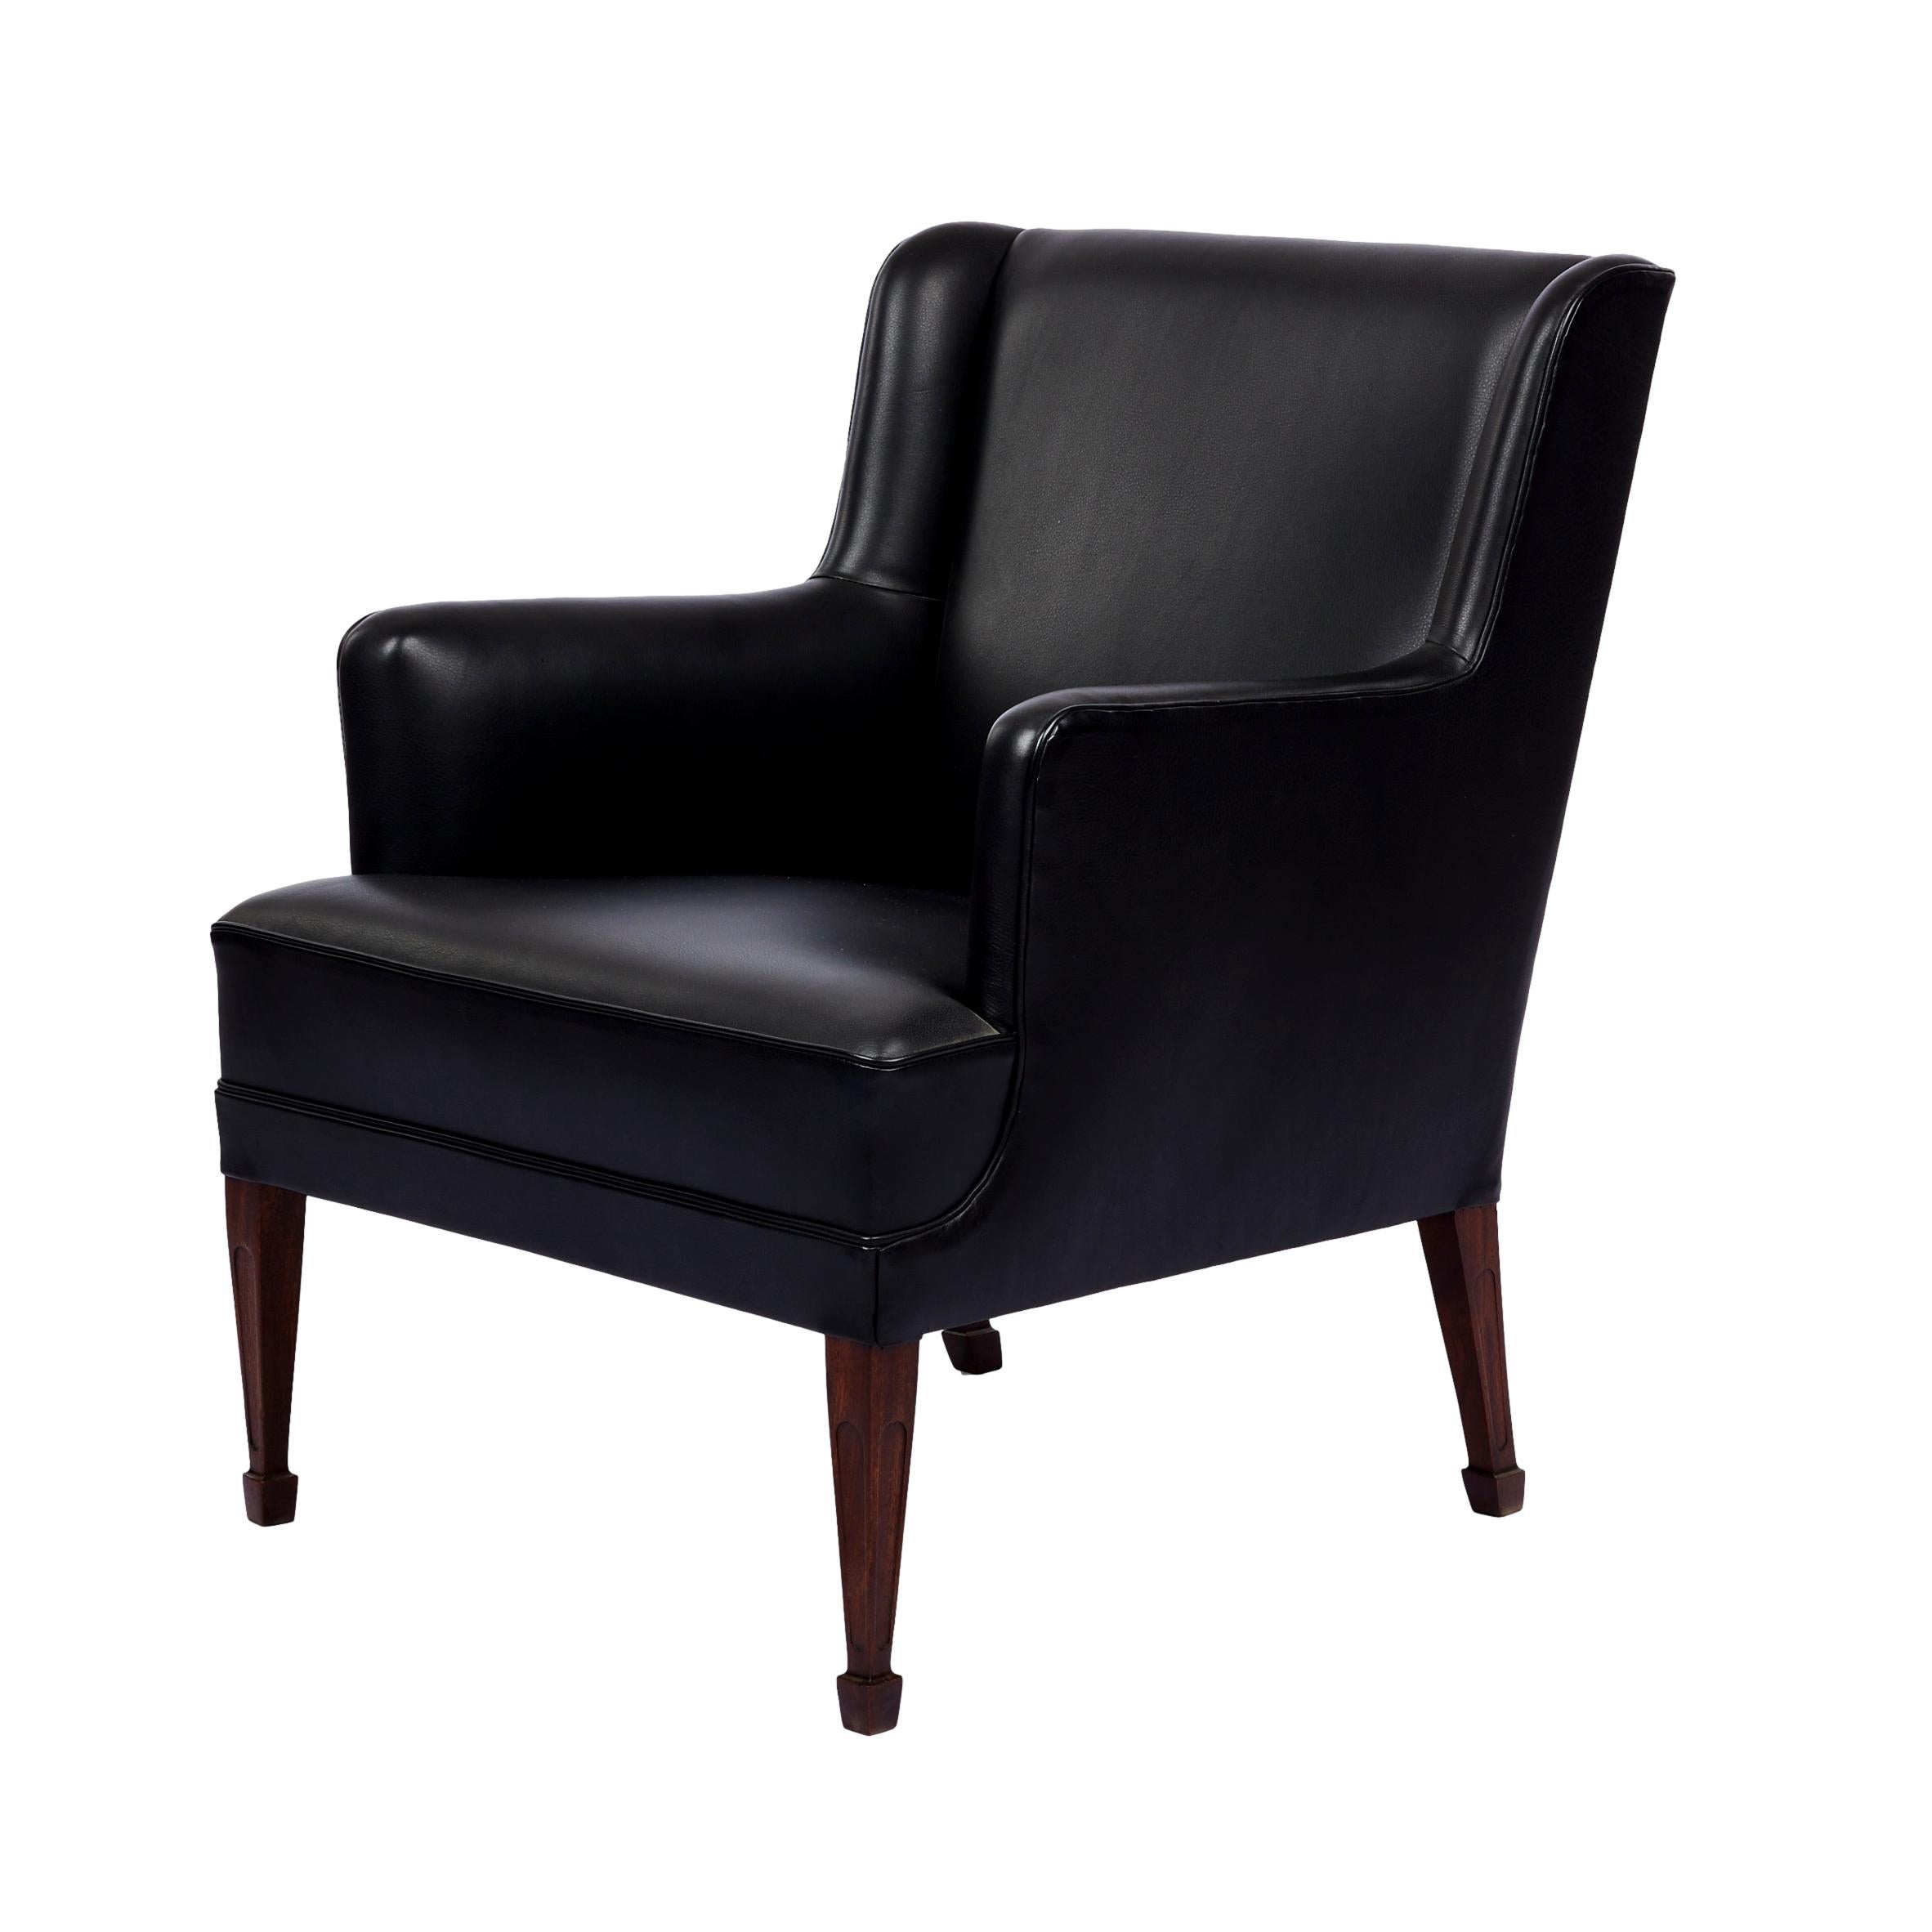 Frits Henningsen lounge chair. Legs are Mahogany. New black leather. From 1940's.
      